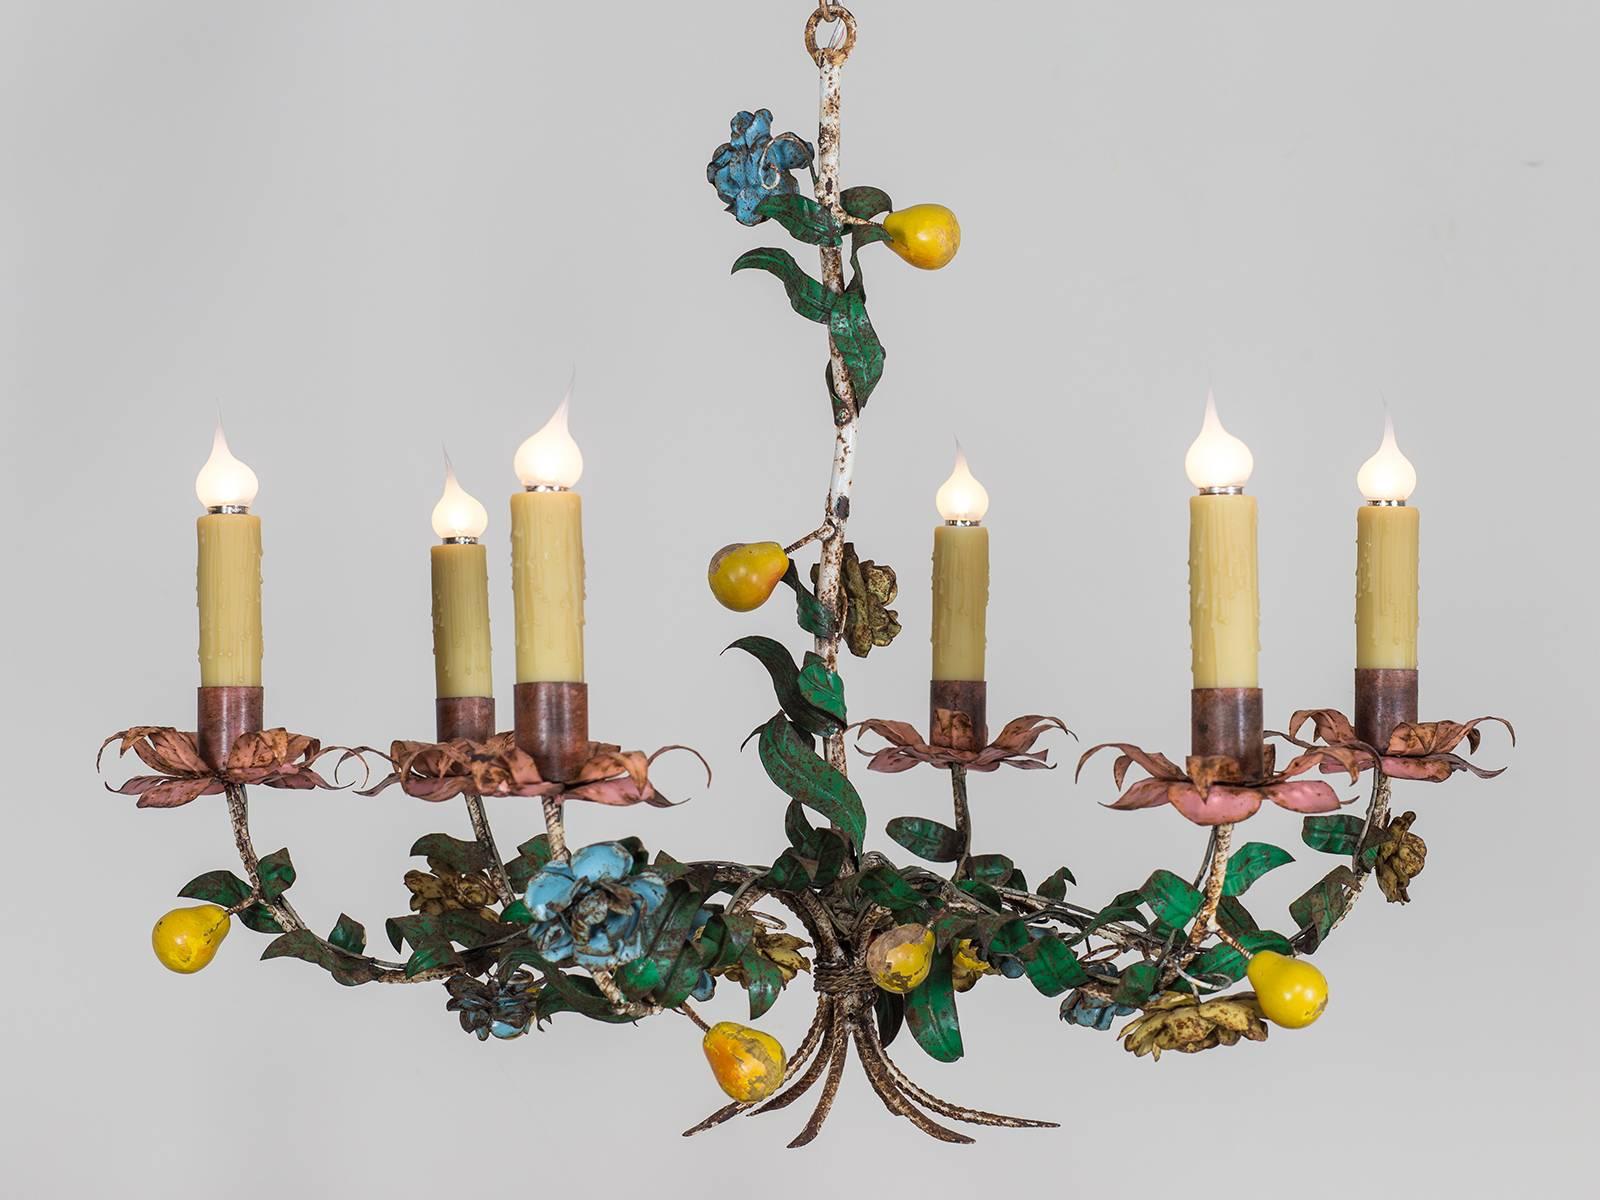 Receive our new selections direct from 1stdibs by email each week. Please click Follow Dealer below and see them first!

The immense charm of the fruit and flowers on this vintage Italian tôle chandelier circa 1920 is marvelous to see. The